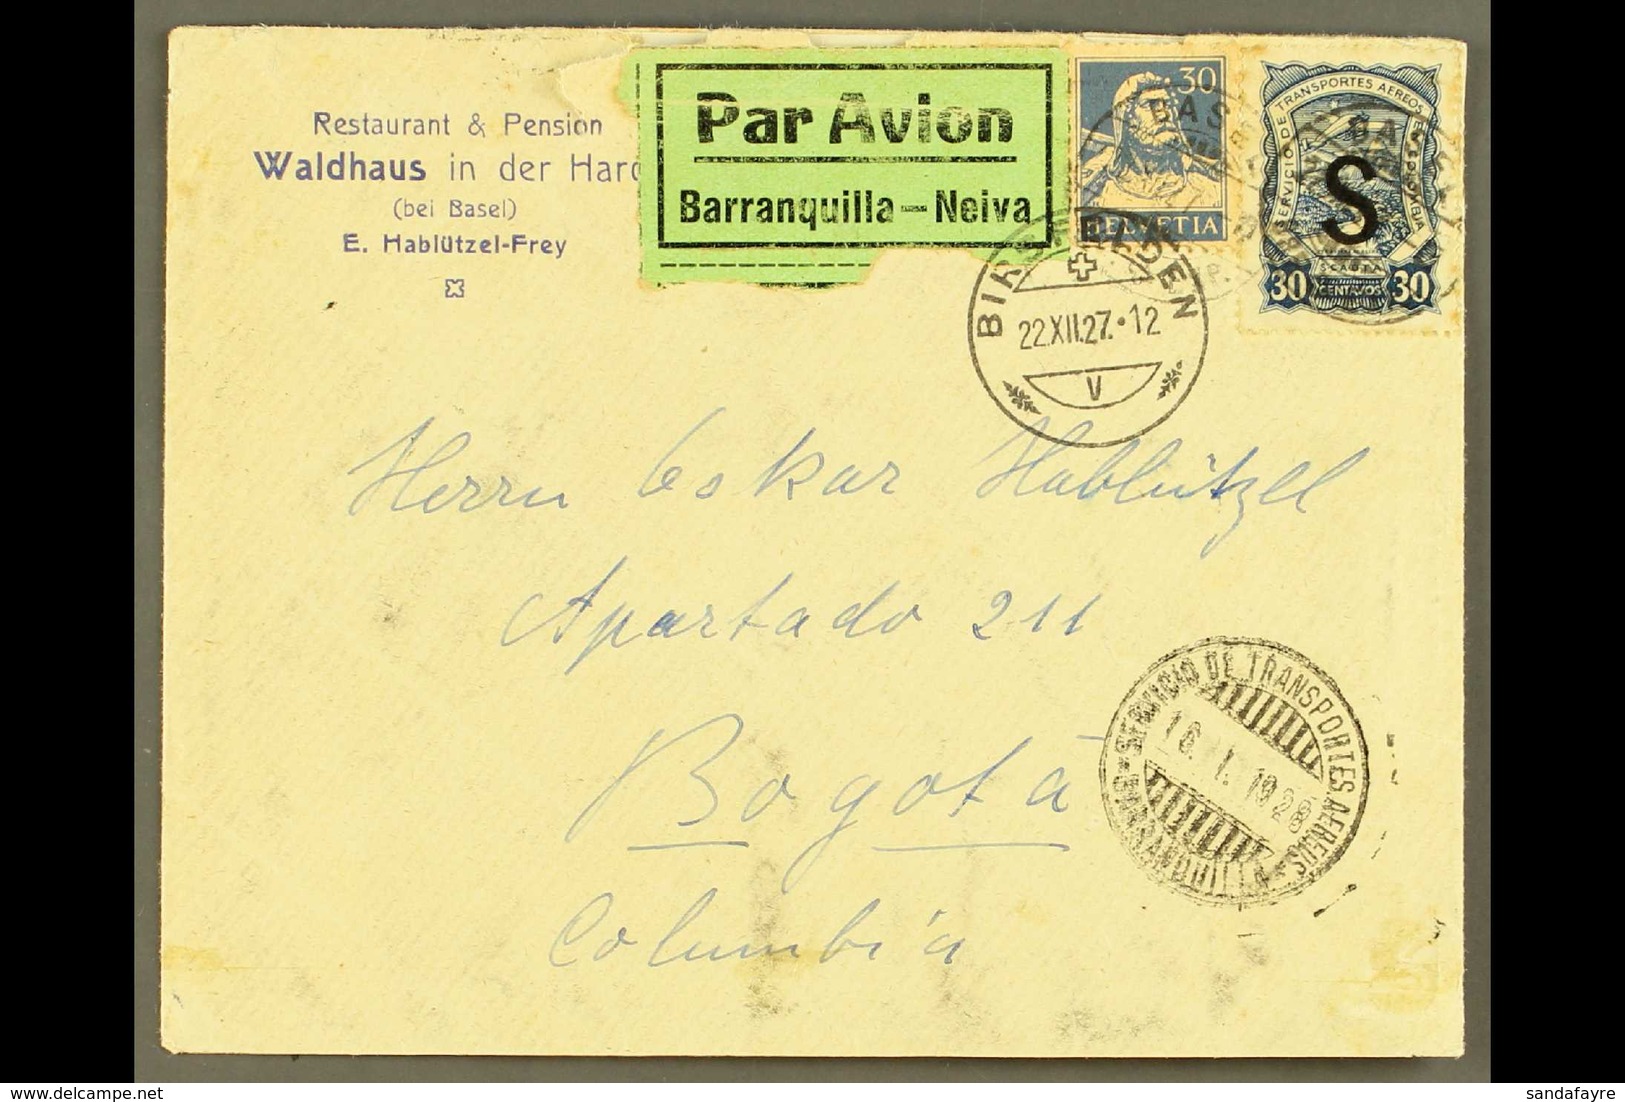 SCADTA 1927 (22 Dec) Cover From Switzerland Addressed To Bogota, Bearing Switzerland 30c And SCADTA 1923 30c With "S" Co - Colombia